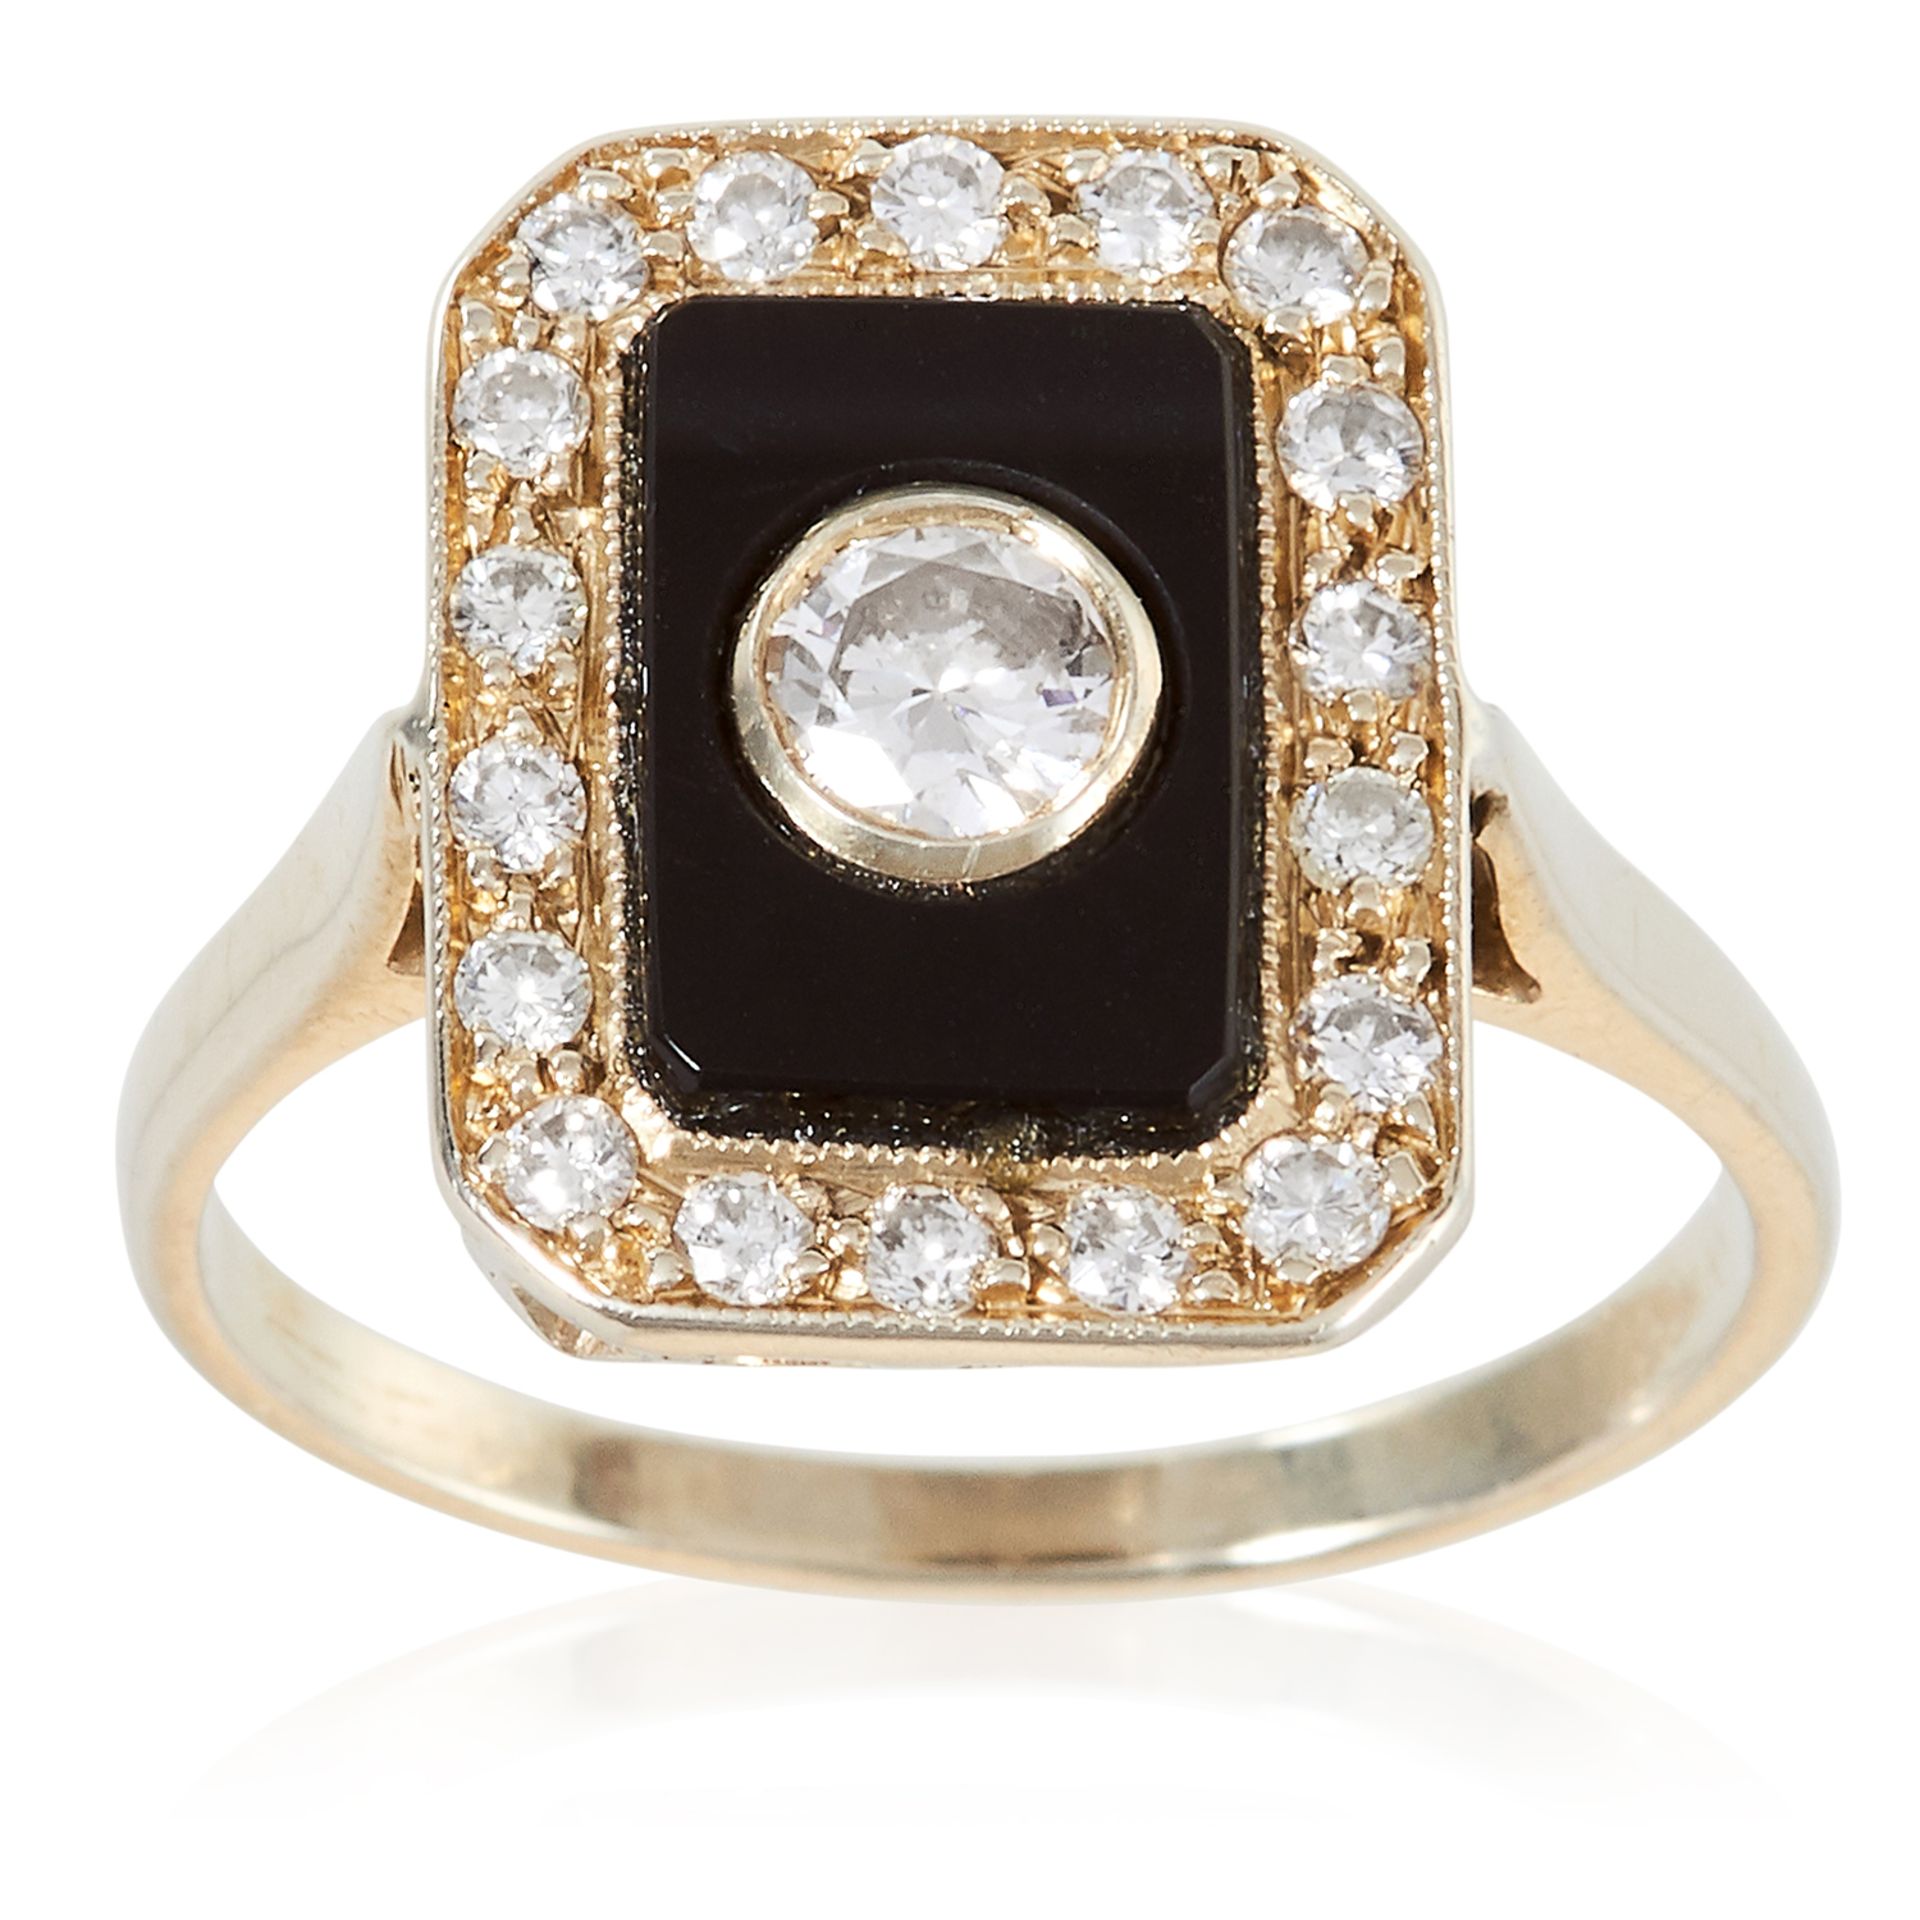 AN ART DECO DIAMOND AND ONYX RING in 18ct gold, the central 0.23 carat round cut diamond set against